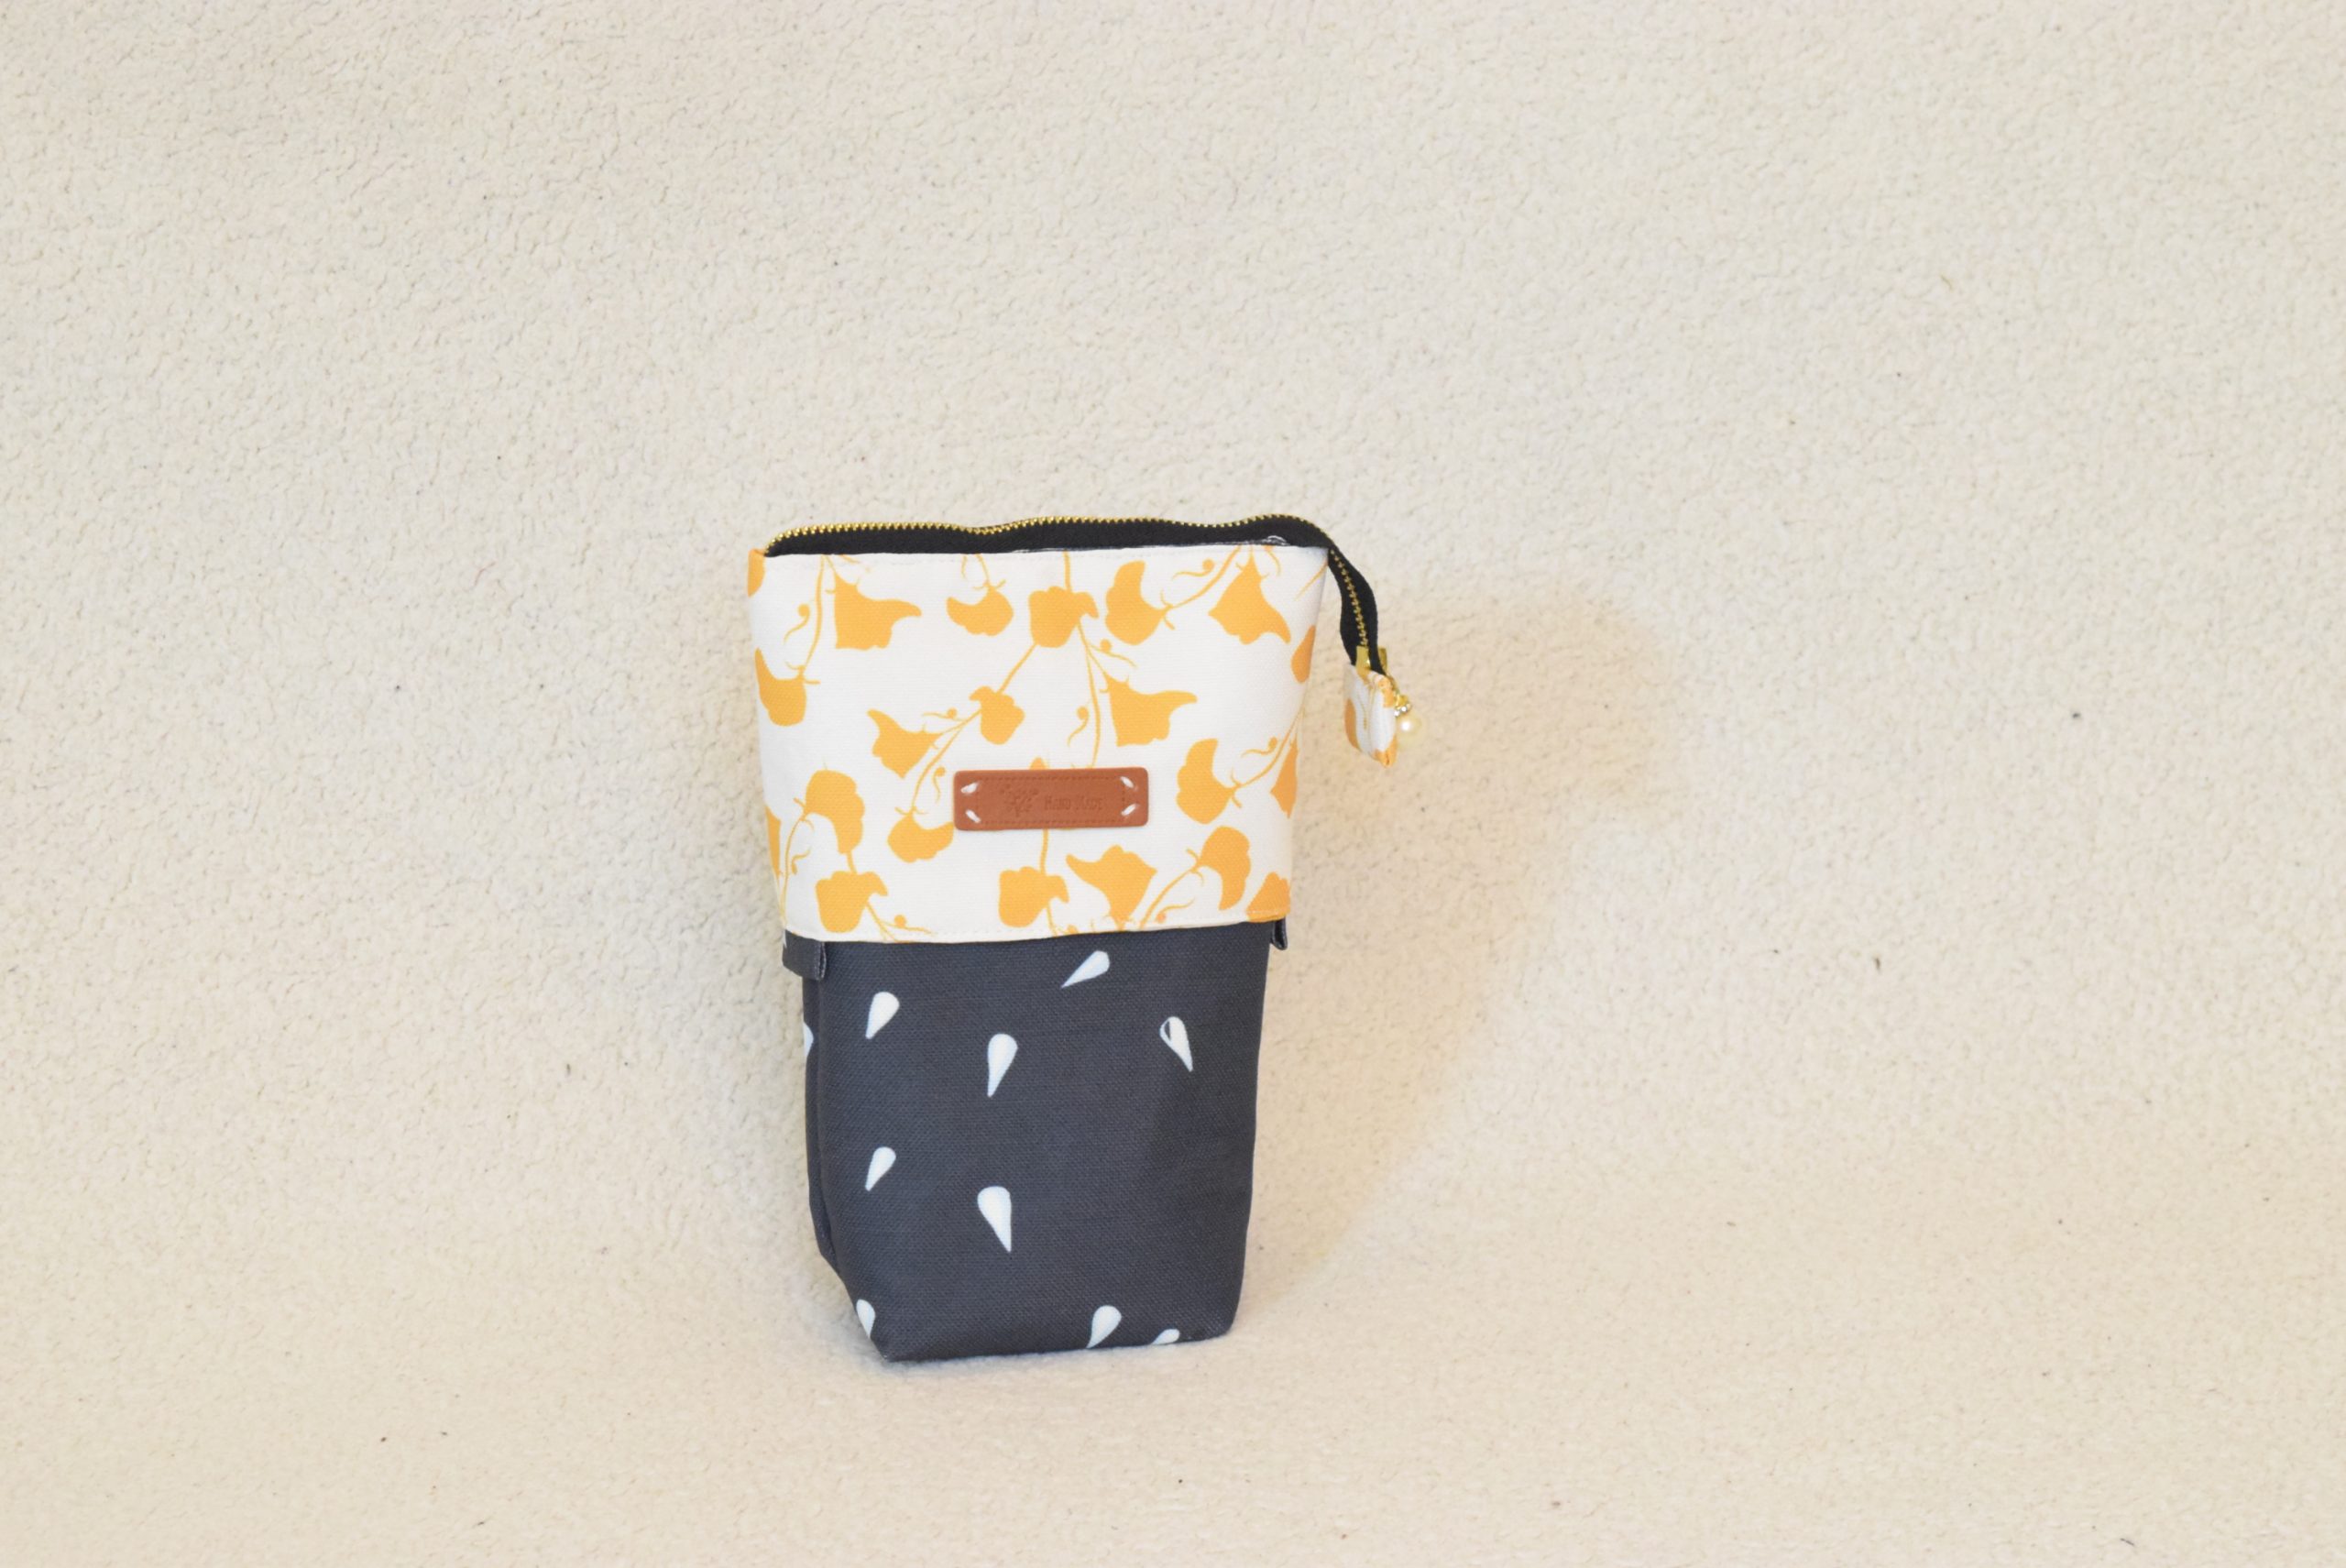 Sliding pouch case by madigitified